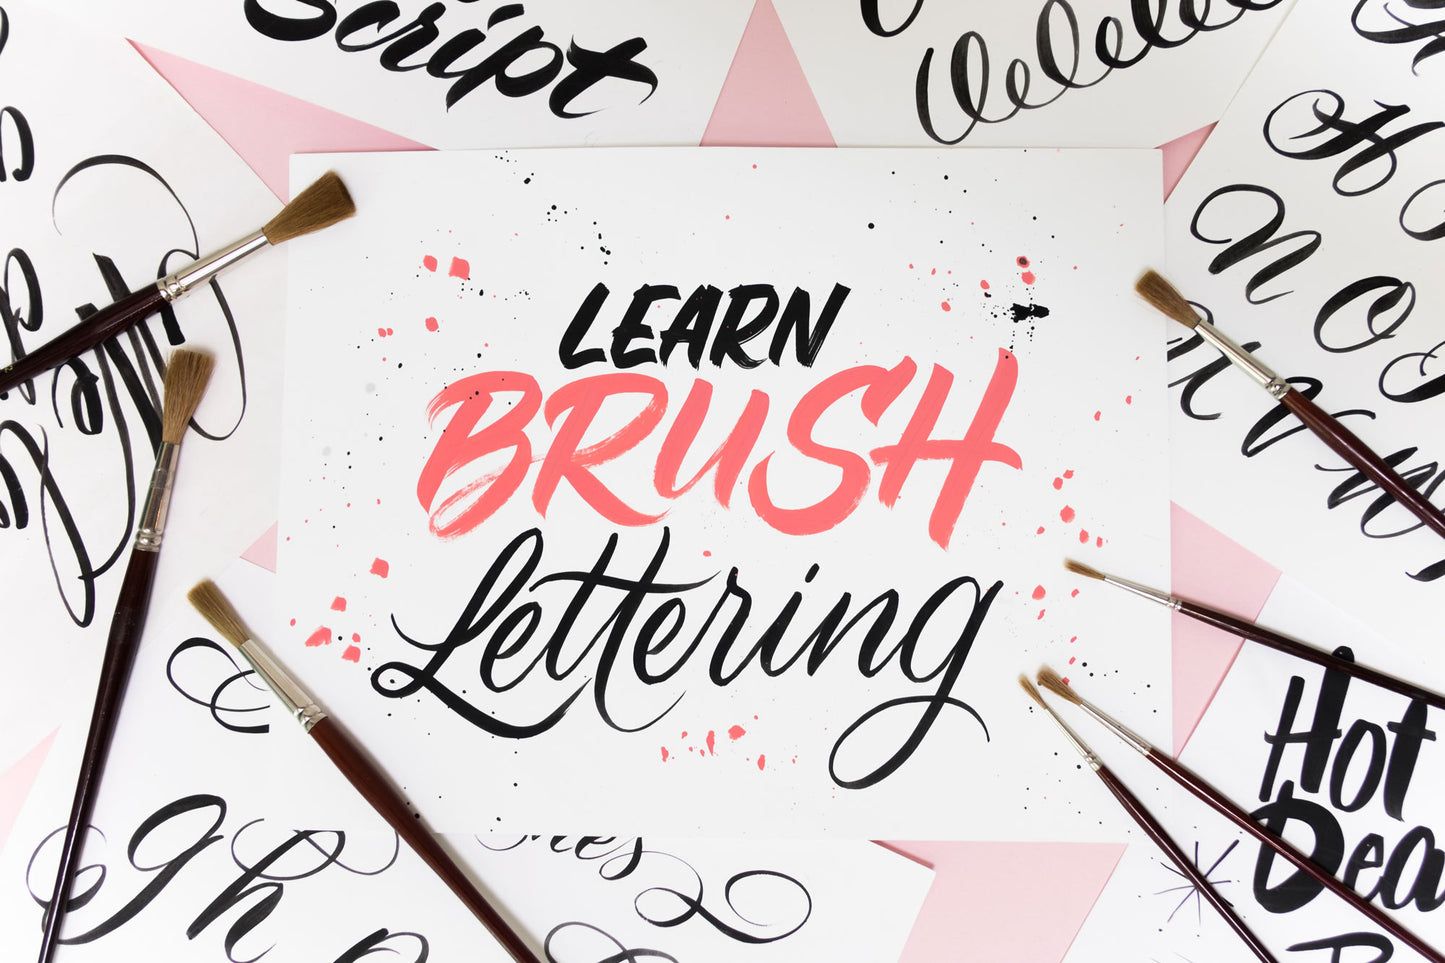 Brushes and sheets of paper with brush lettering on them.